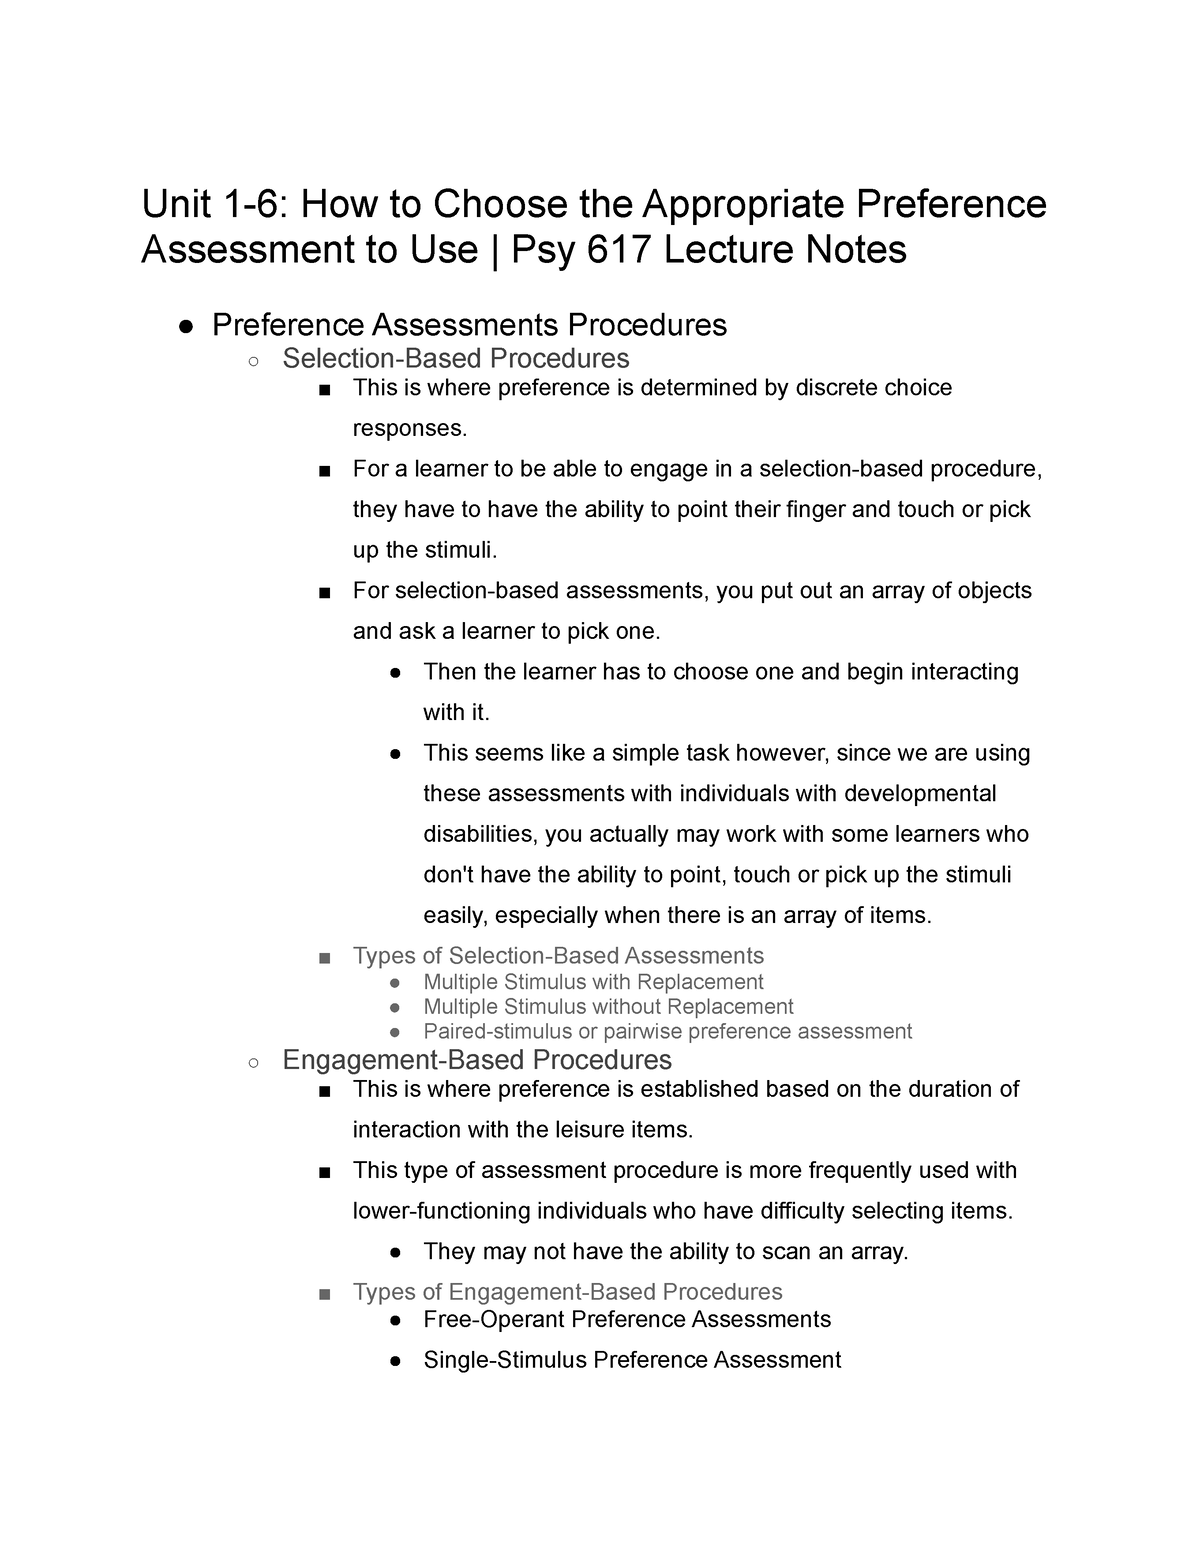 unit-1-6-how-to-choose-the-appropriate-preference-assessment-to-use-psy